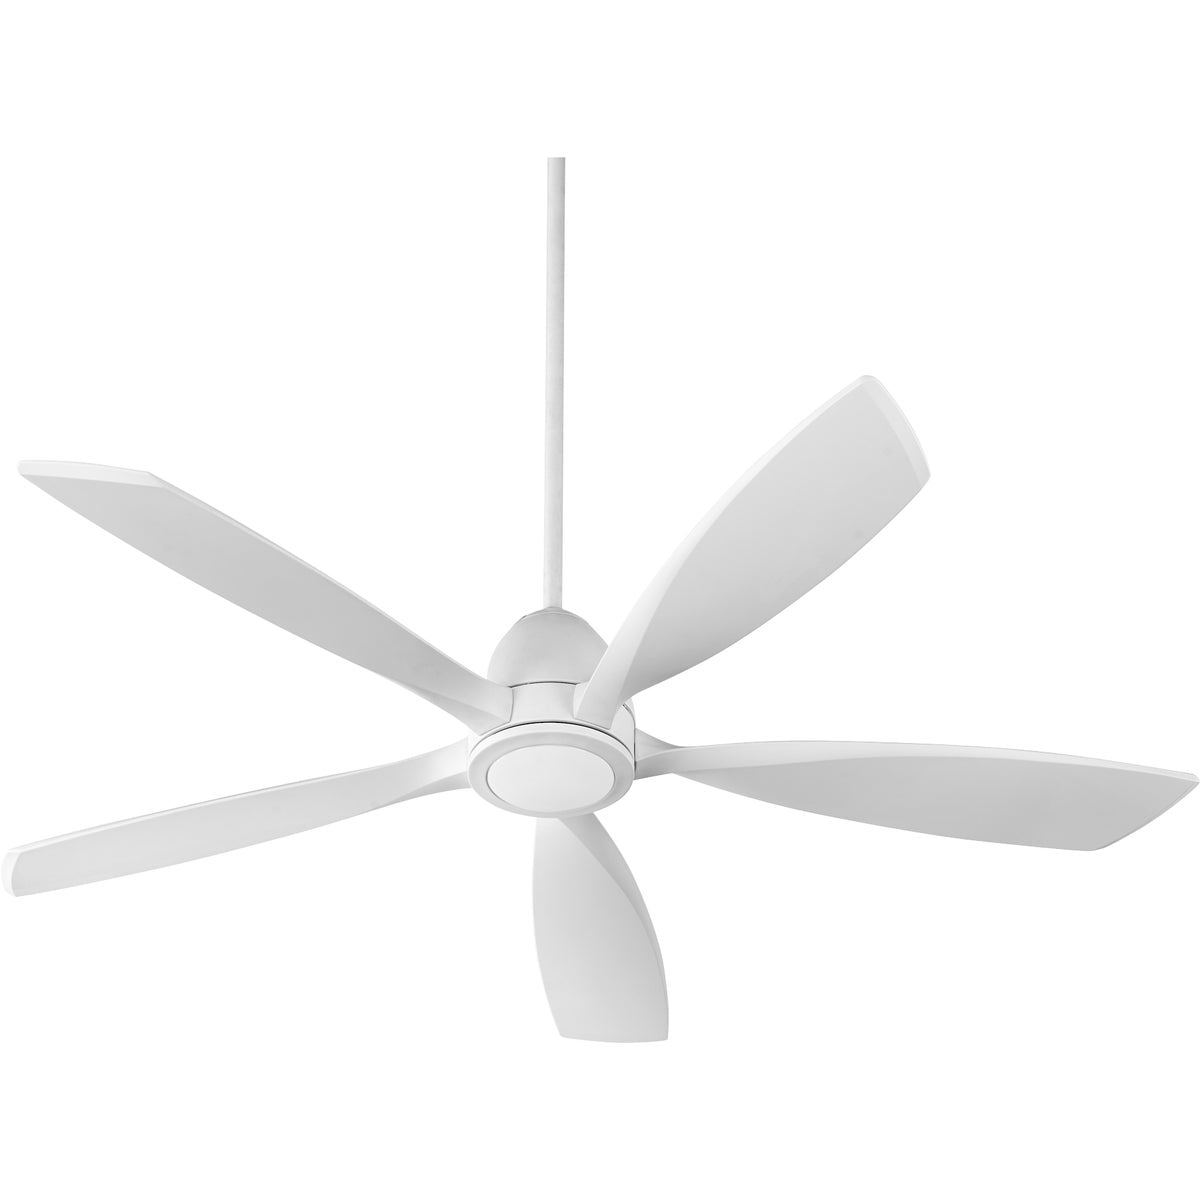 A contemporary ceiling fan with integrated LED lighting, featuring a 16-degree blade pitch and 6-speed DC motor. Dimensions: 13.5&quot;H x 56&quot;W.